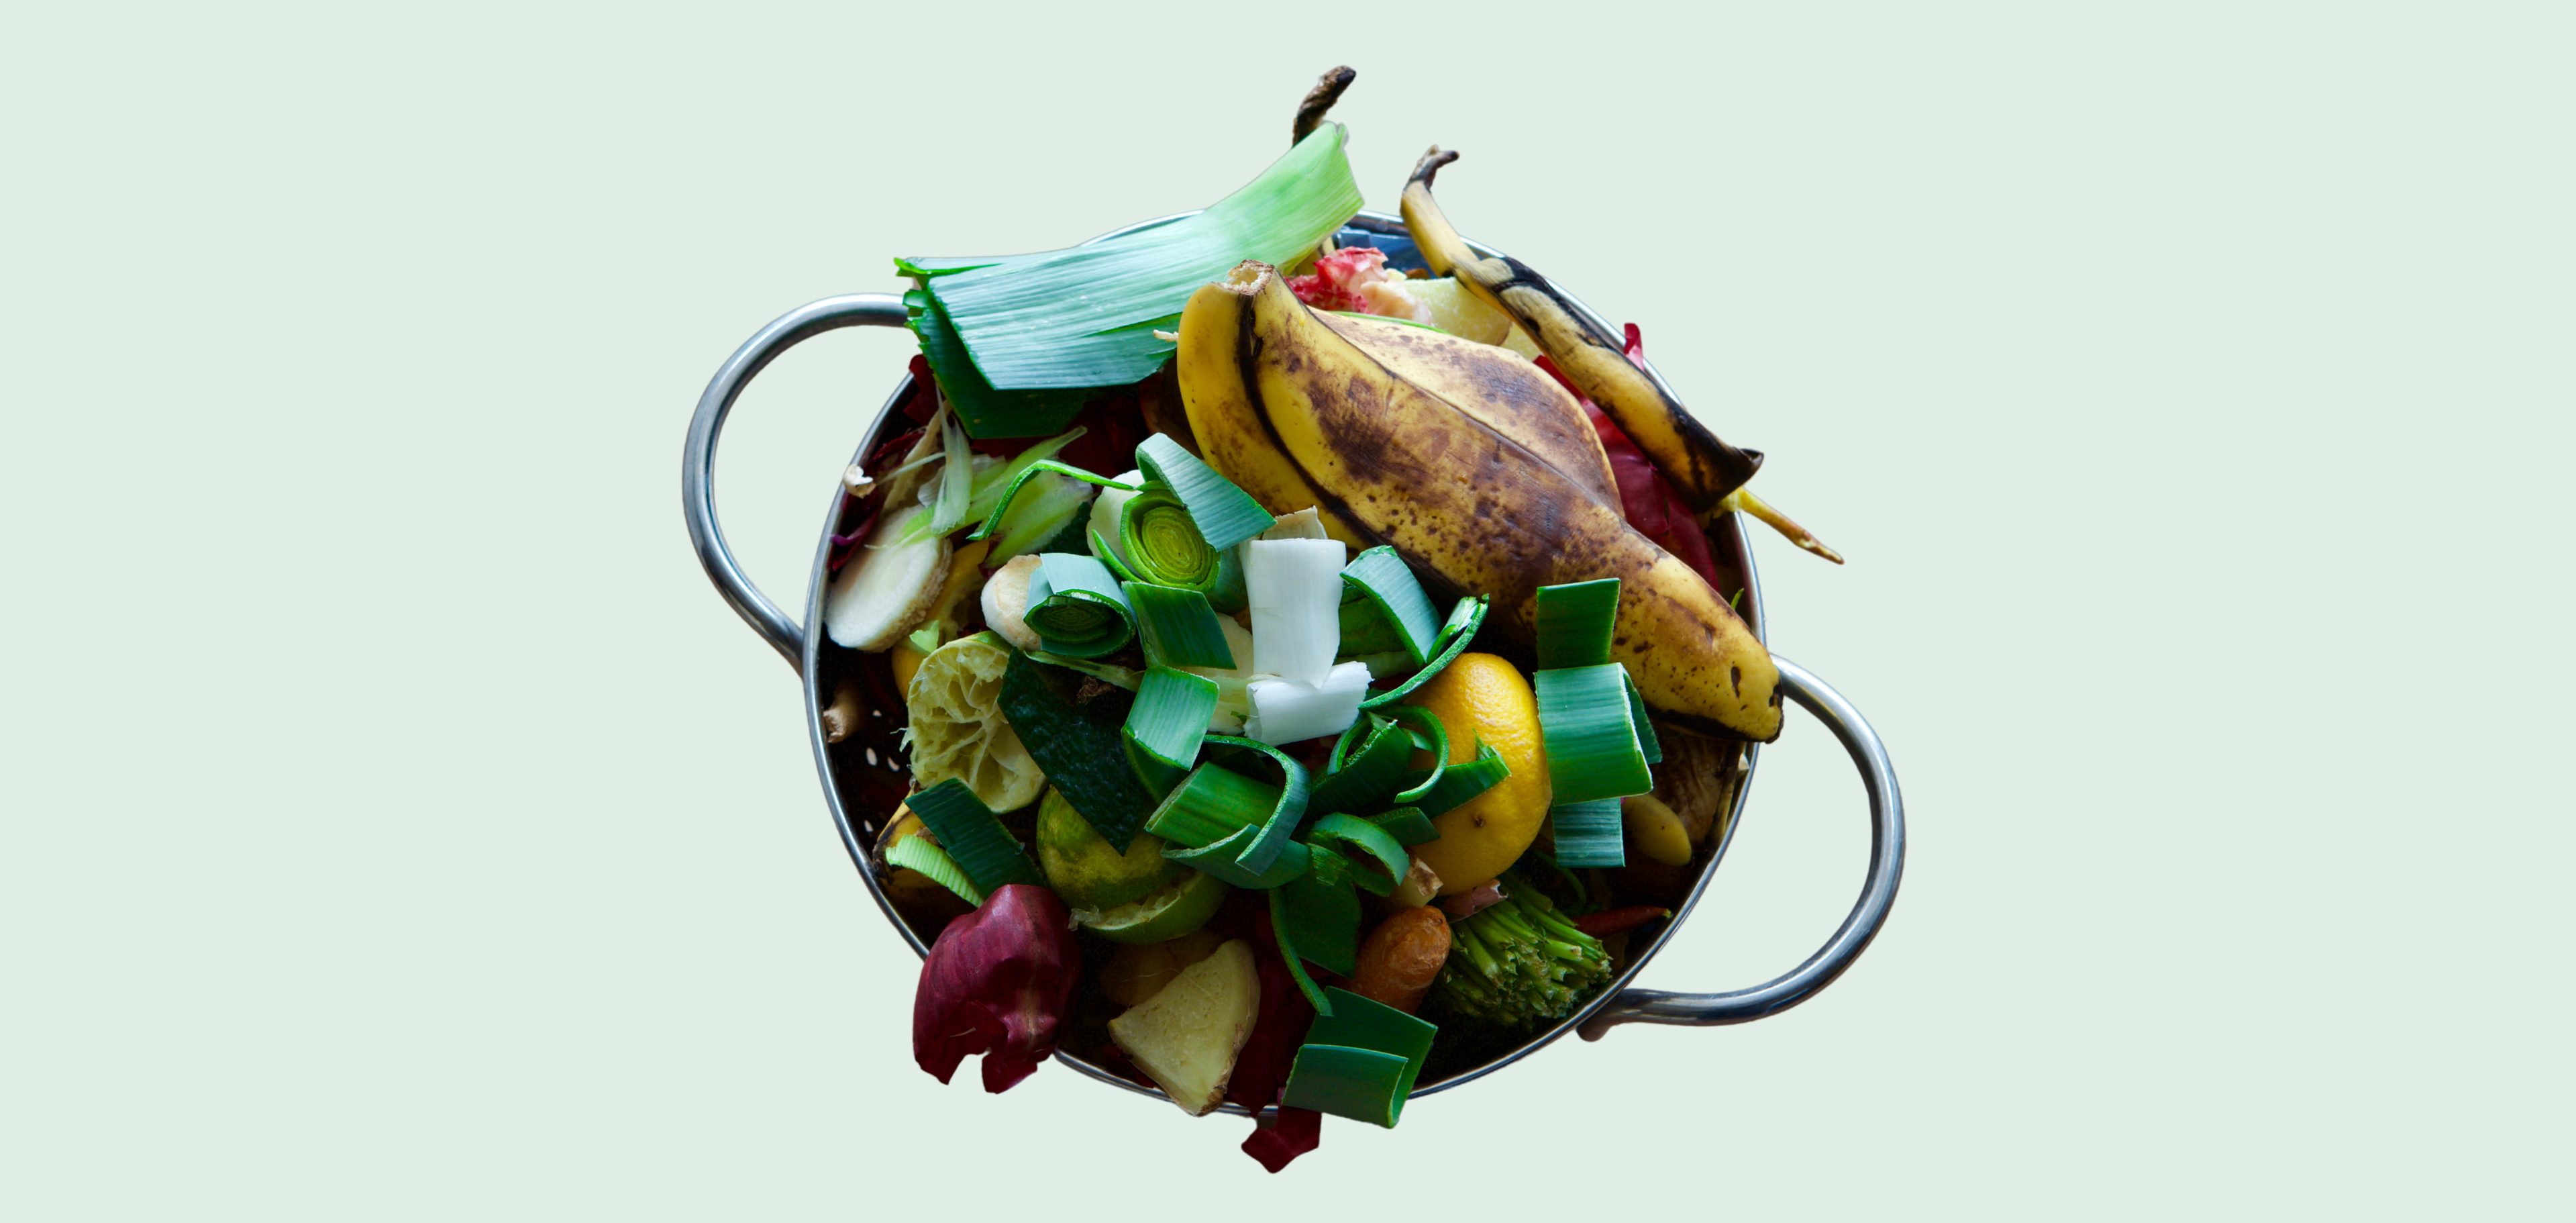 A pile of food scraps in a bowl 